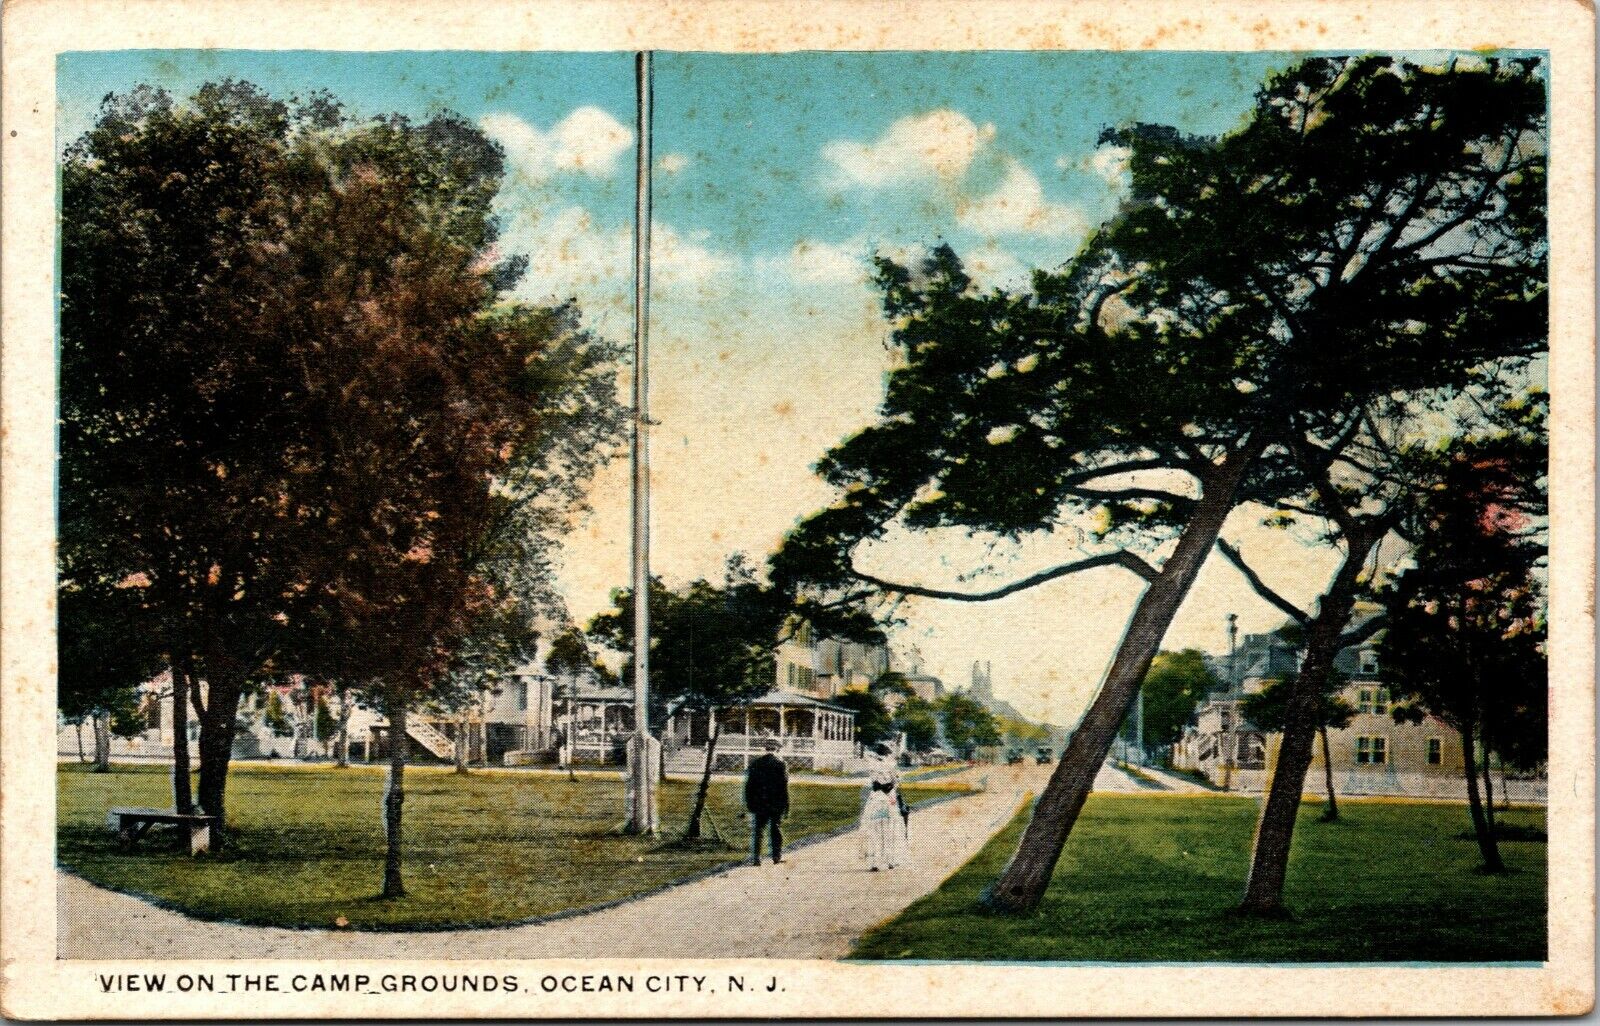 Ocean City New Jersey Postcard View on the Camp Grounds 1915 RJ